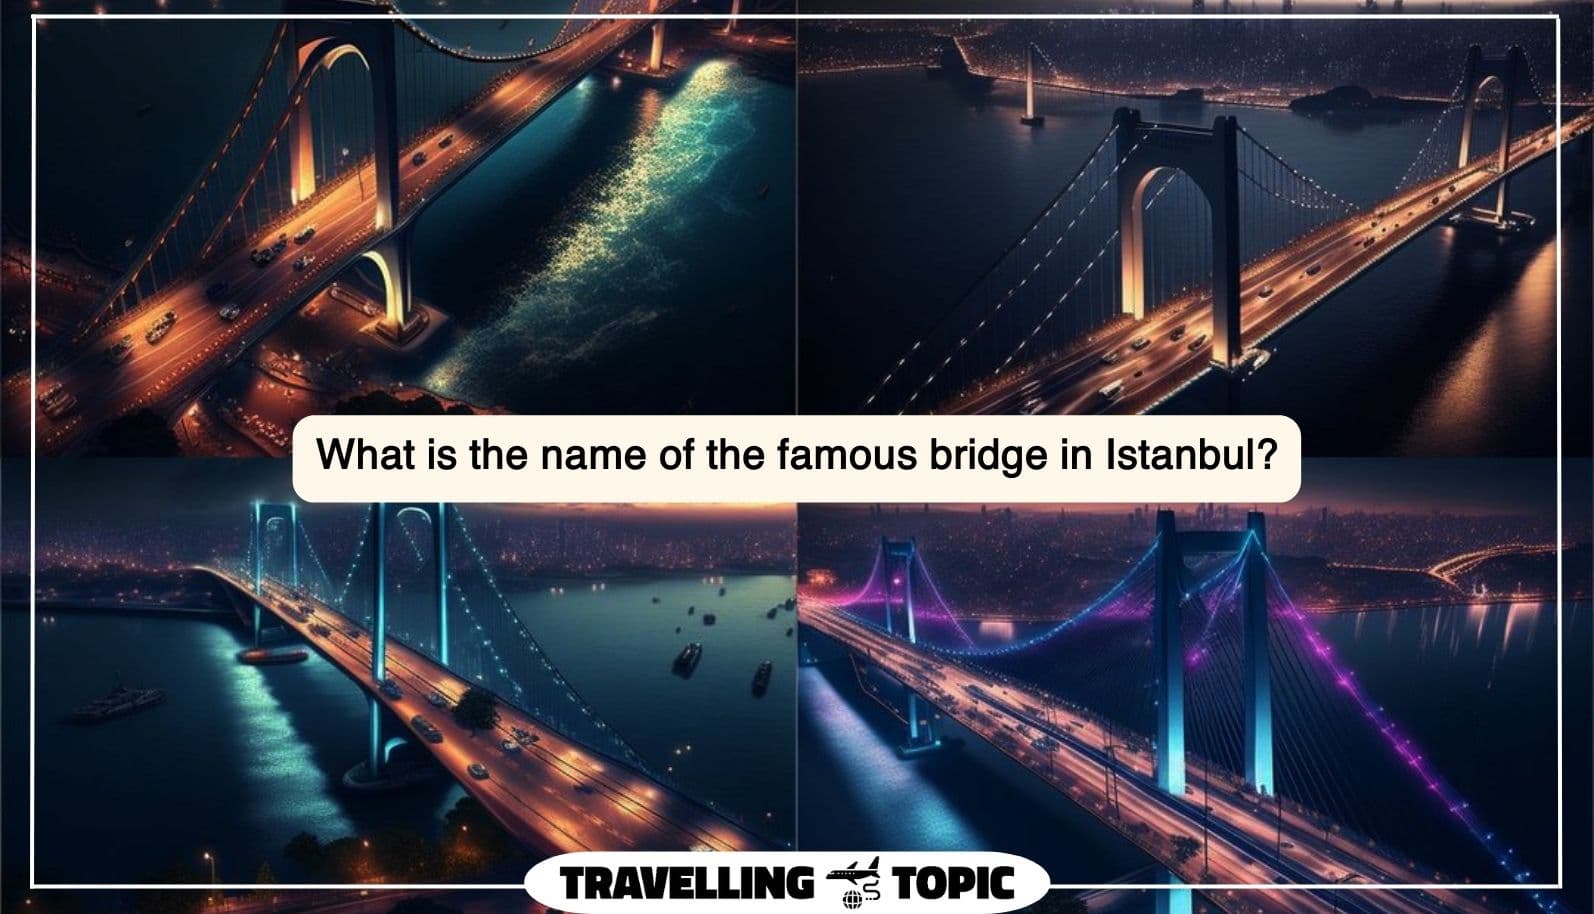 What is the name of the famous bridge in Istanbul?